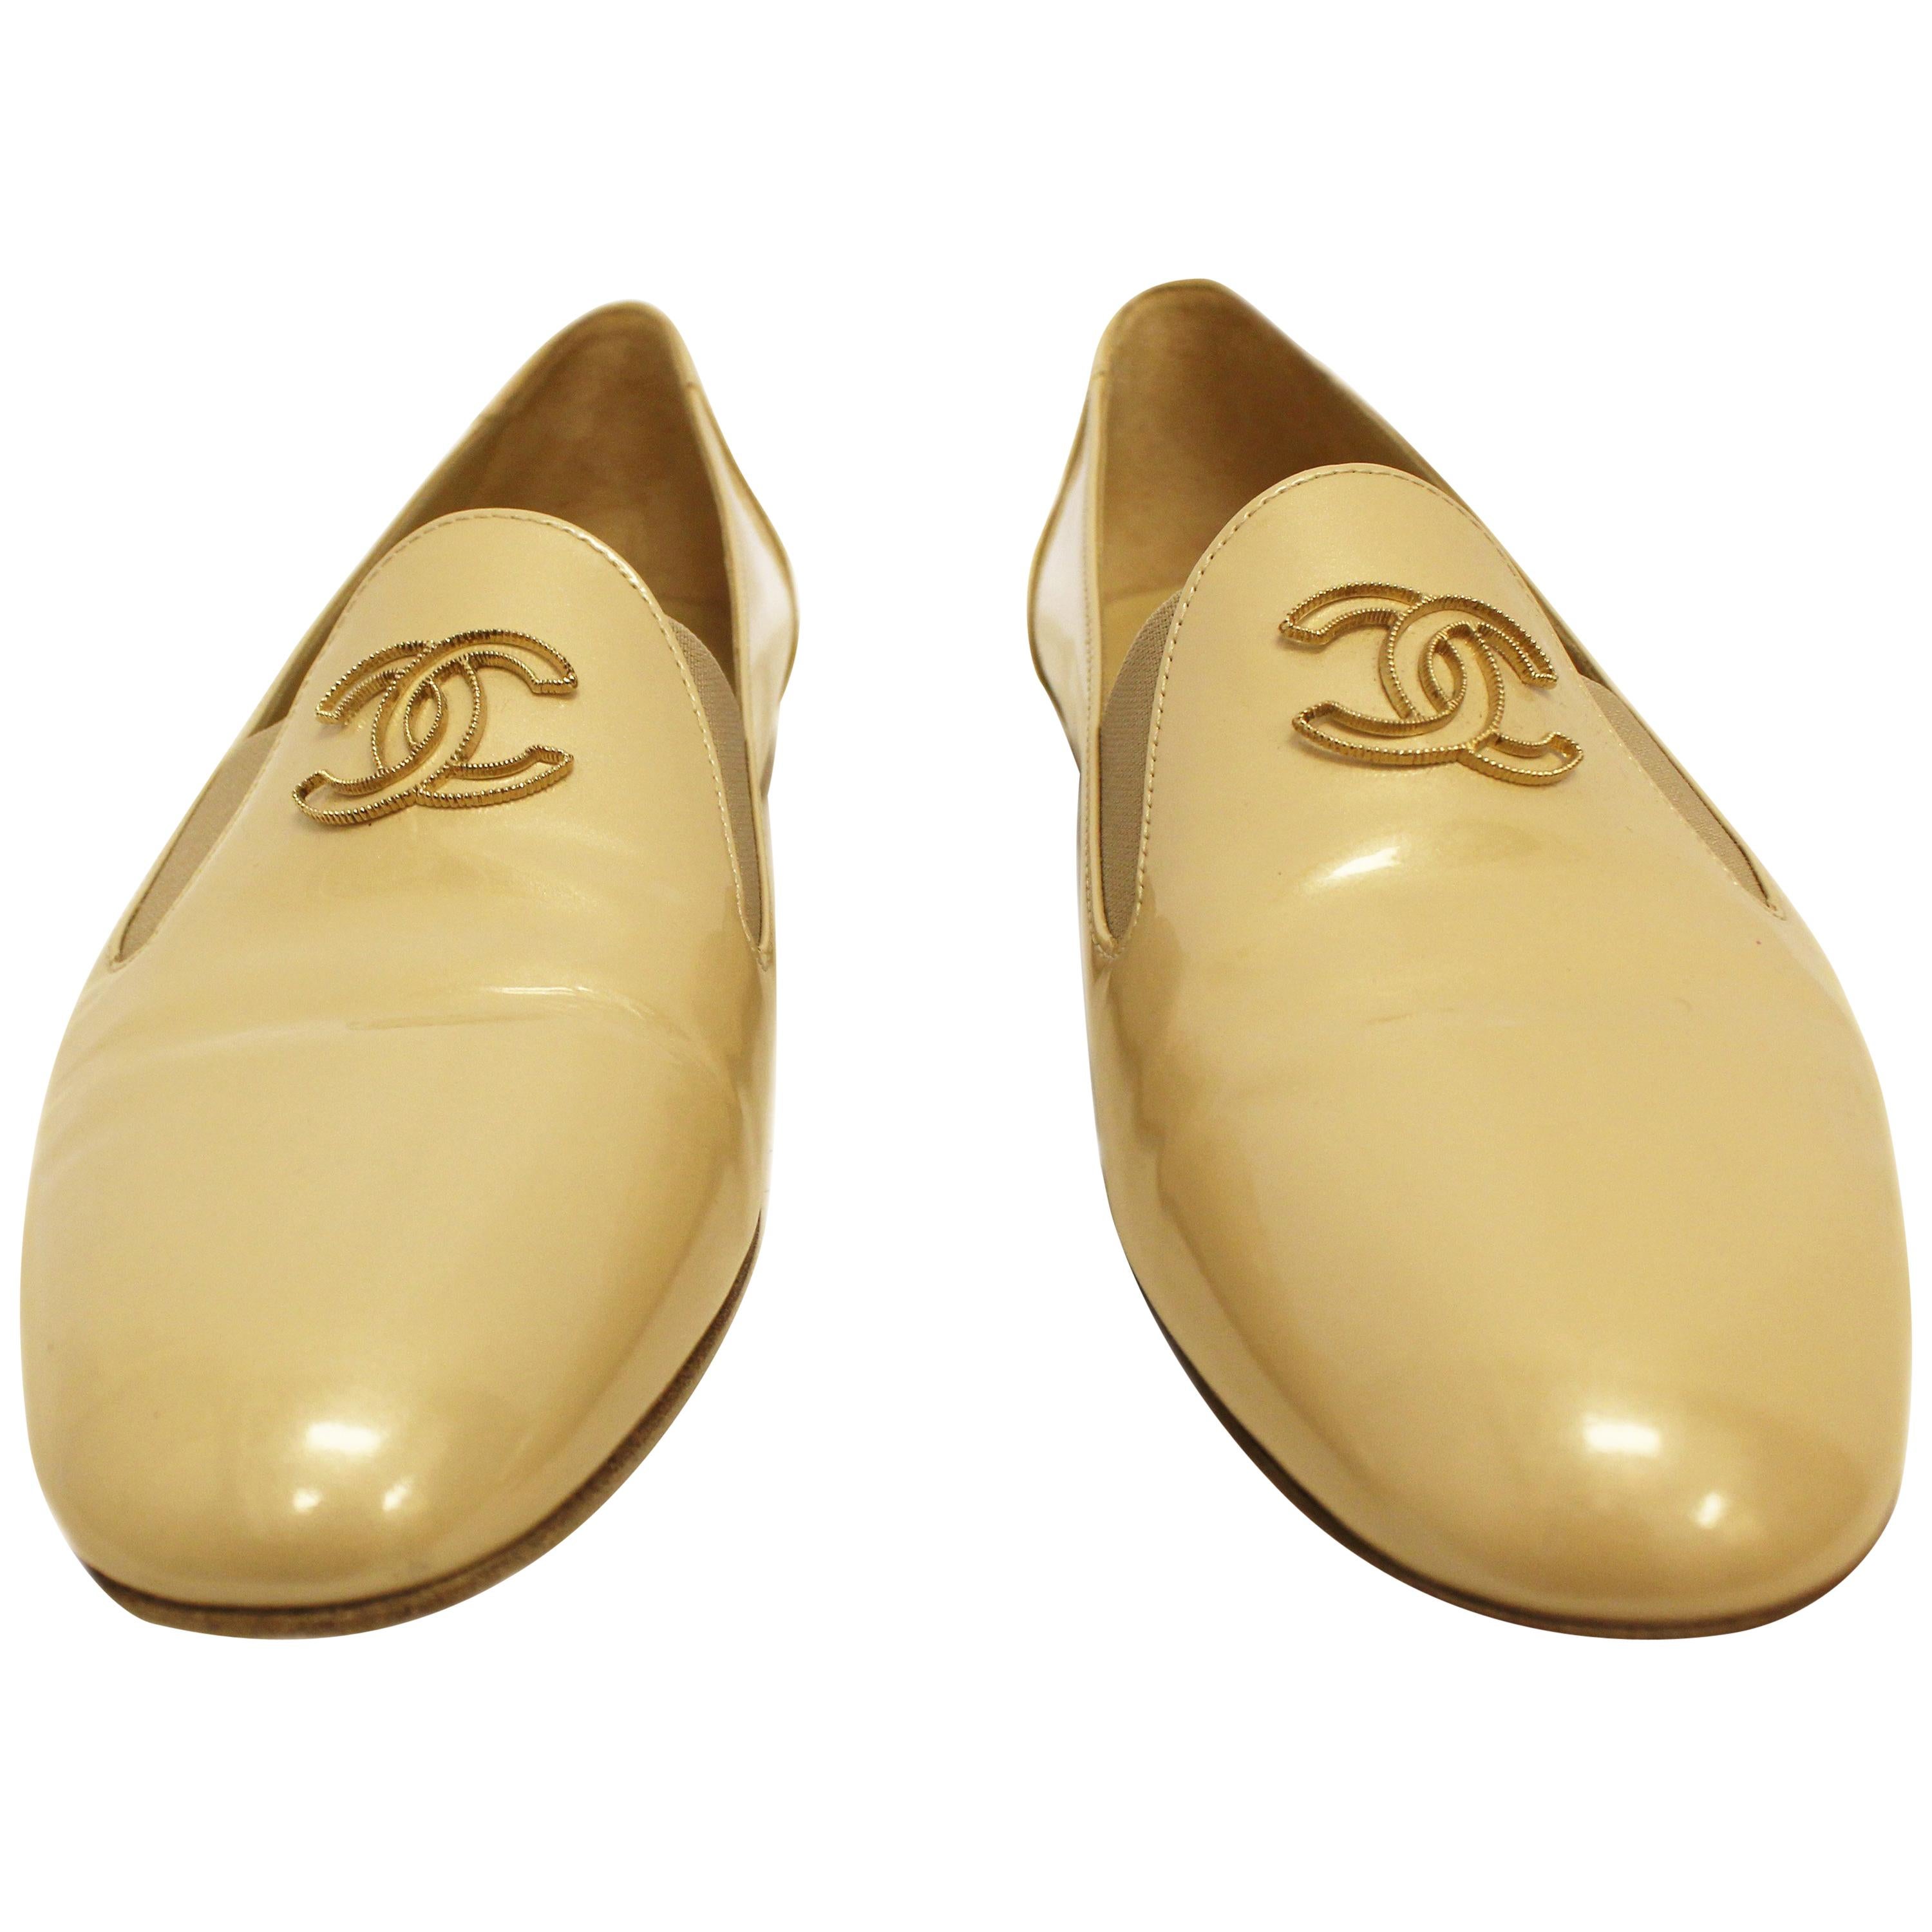 Chanel Pearlized Beige Patent Leather Flat Pumps